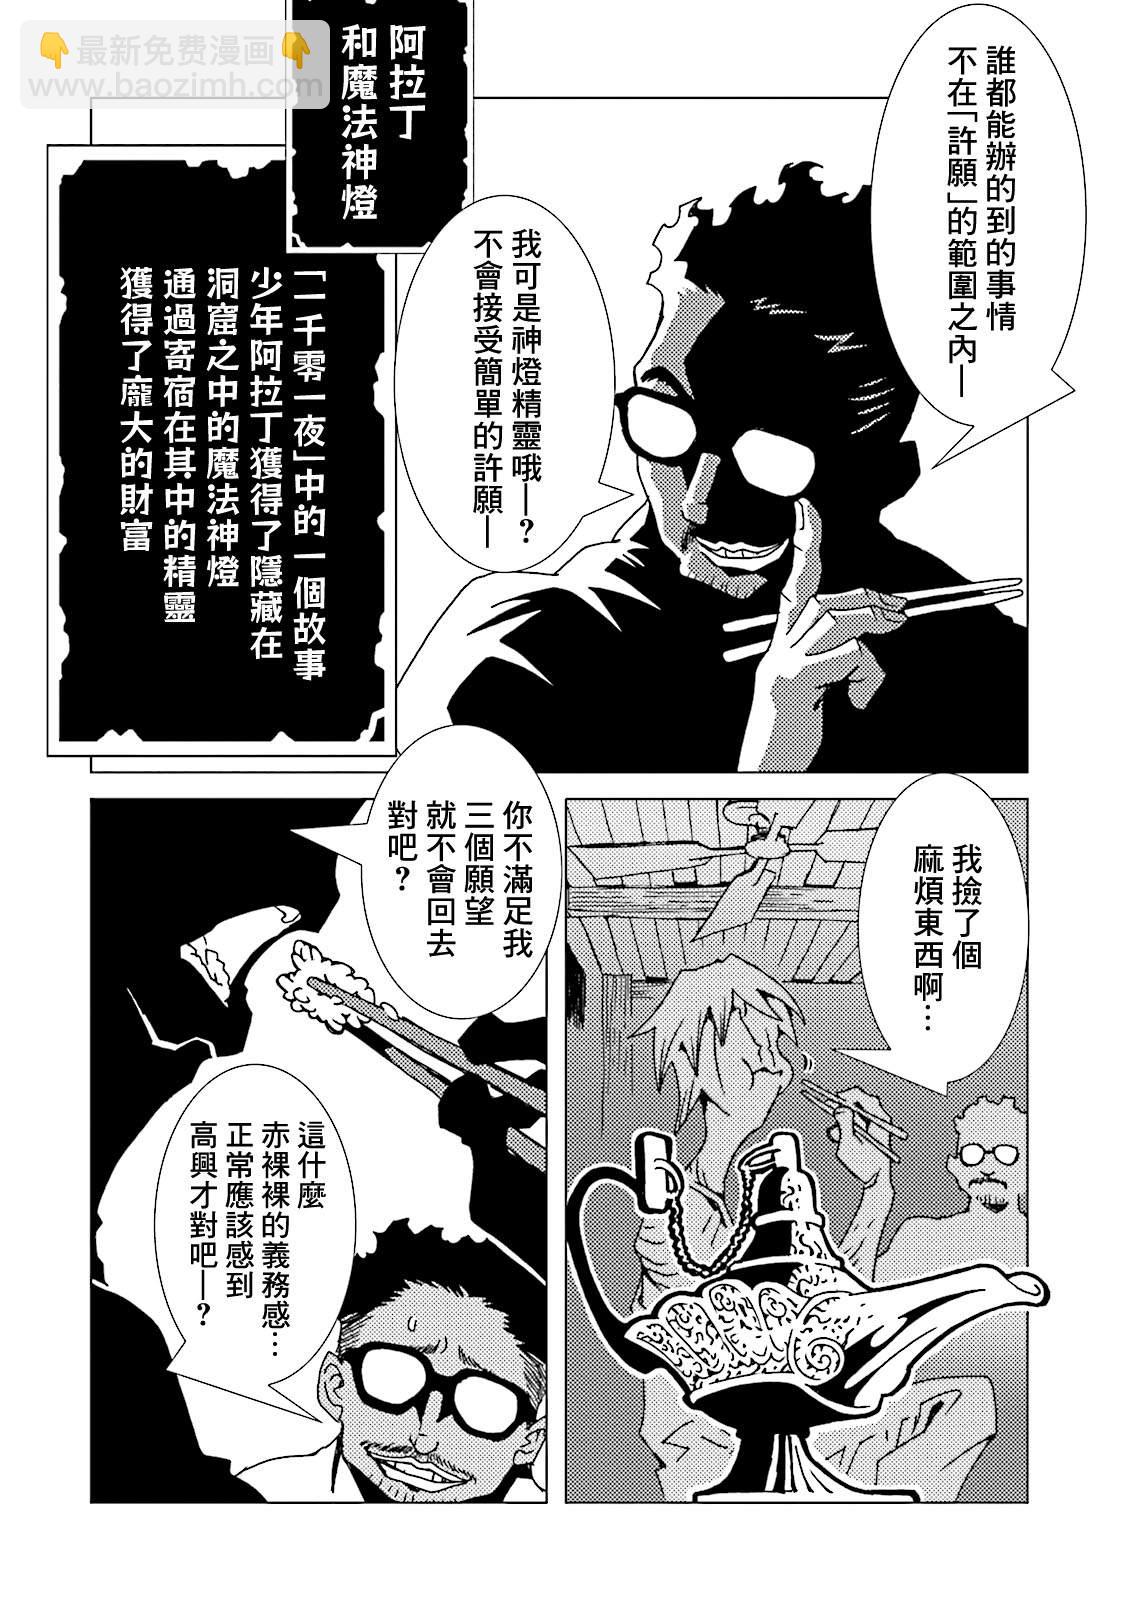 AREA51 - 第47话 - 2